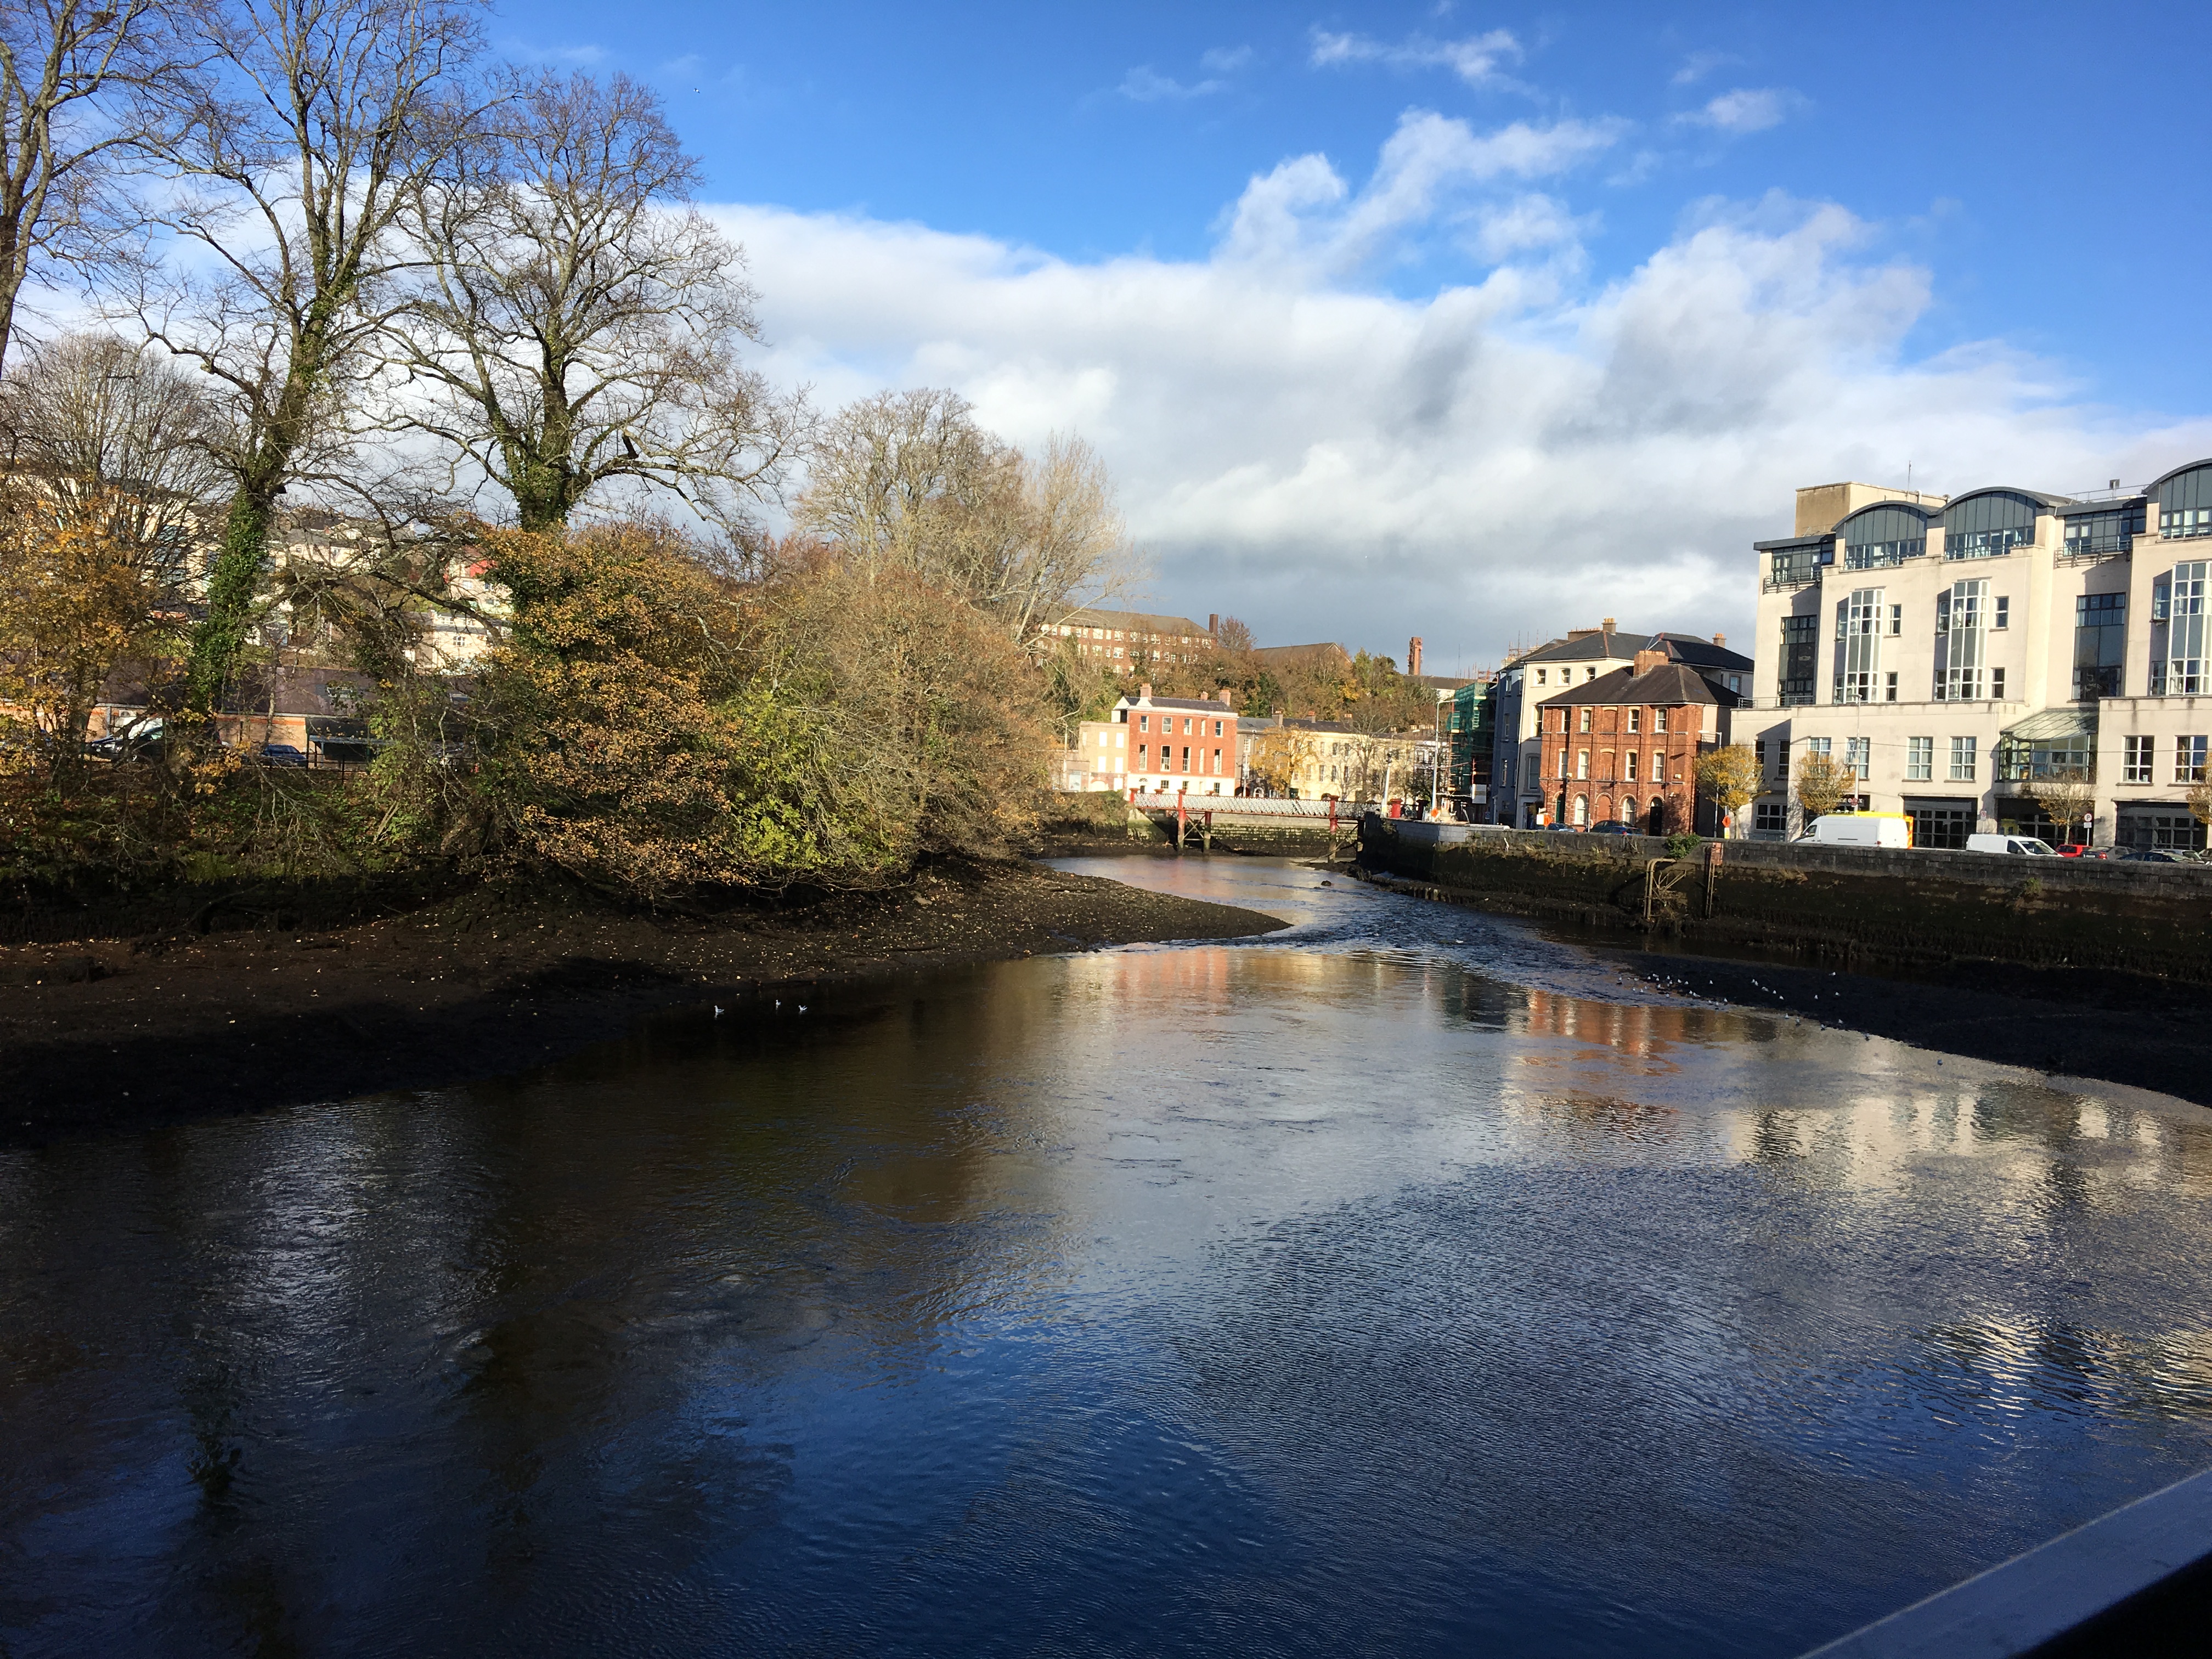 Photograph of the river Lee